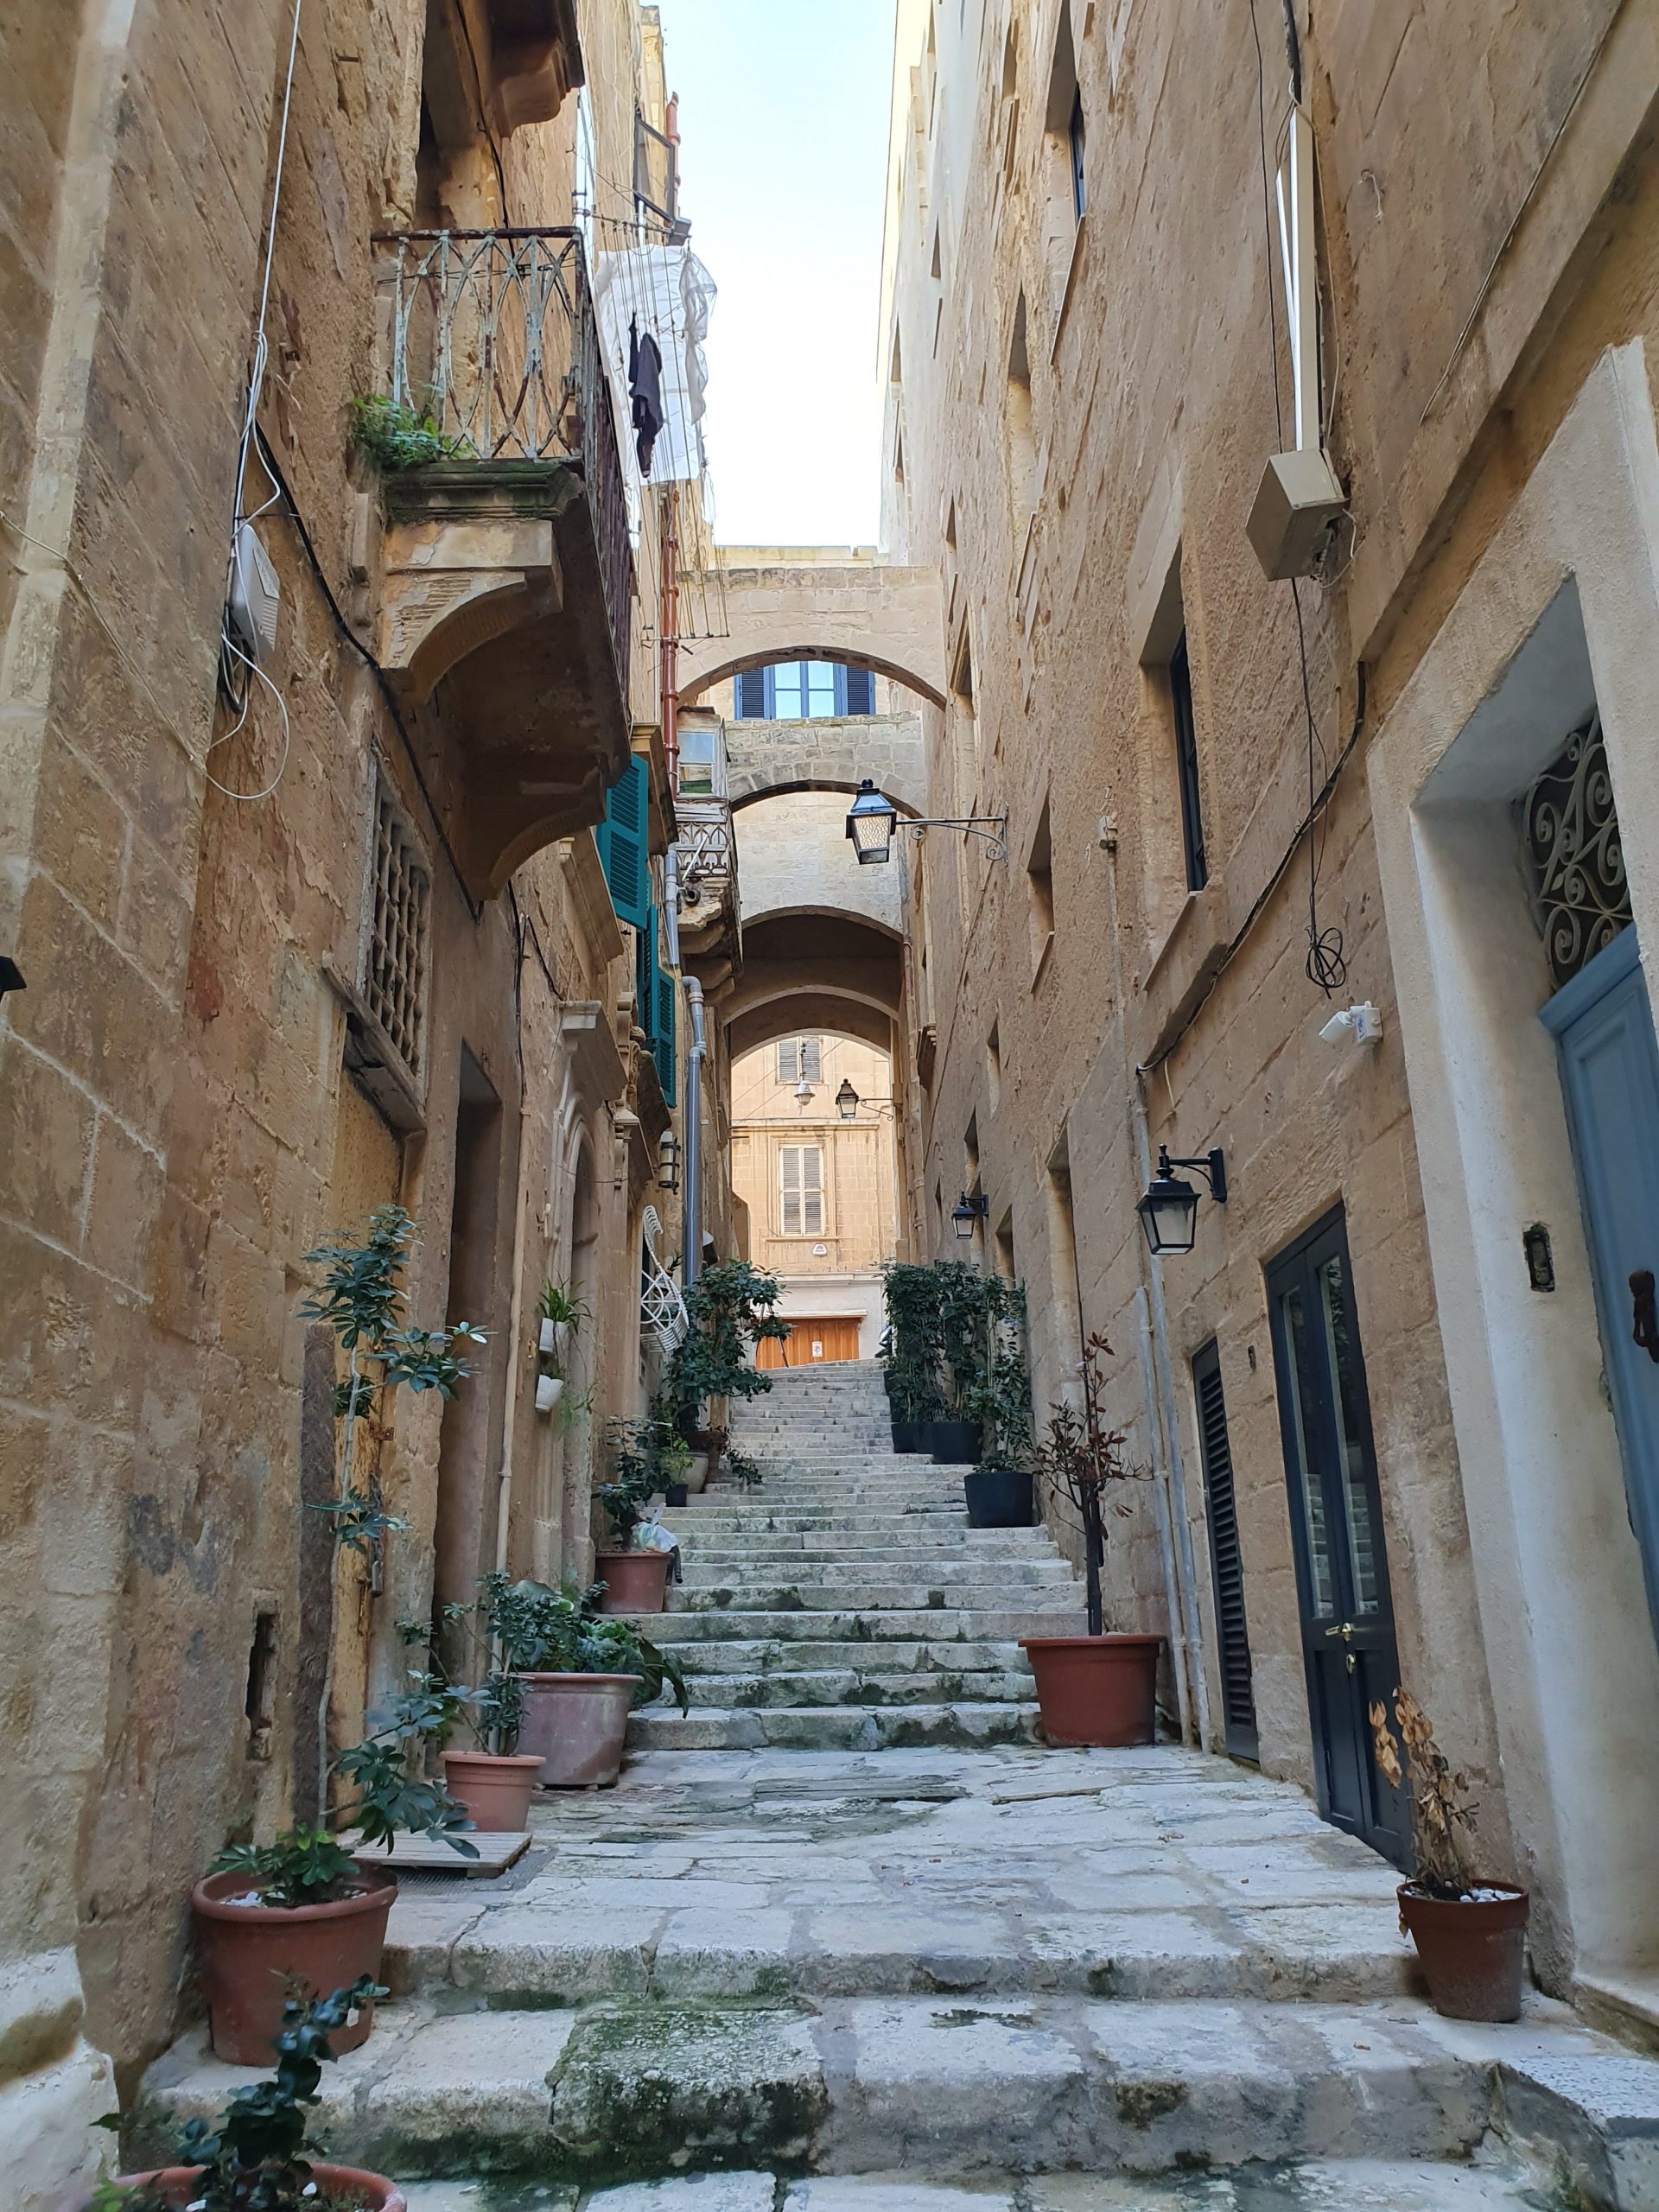 Searching for a Rental Property in Malta